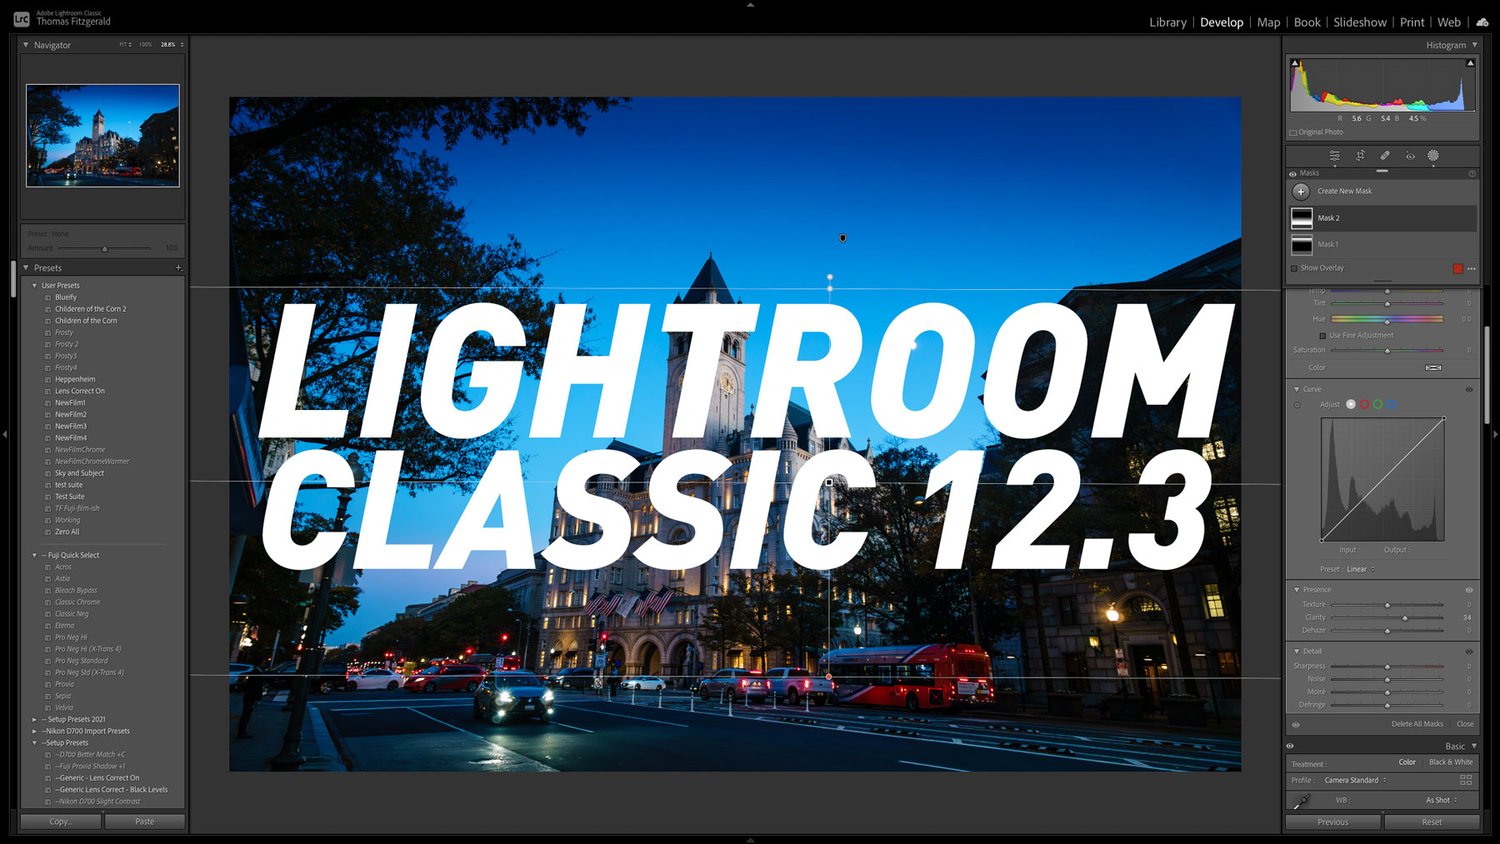 Lightroom Classic 12.3 – More than a point upgrade? — Thomas Fitzgerald Photography